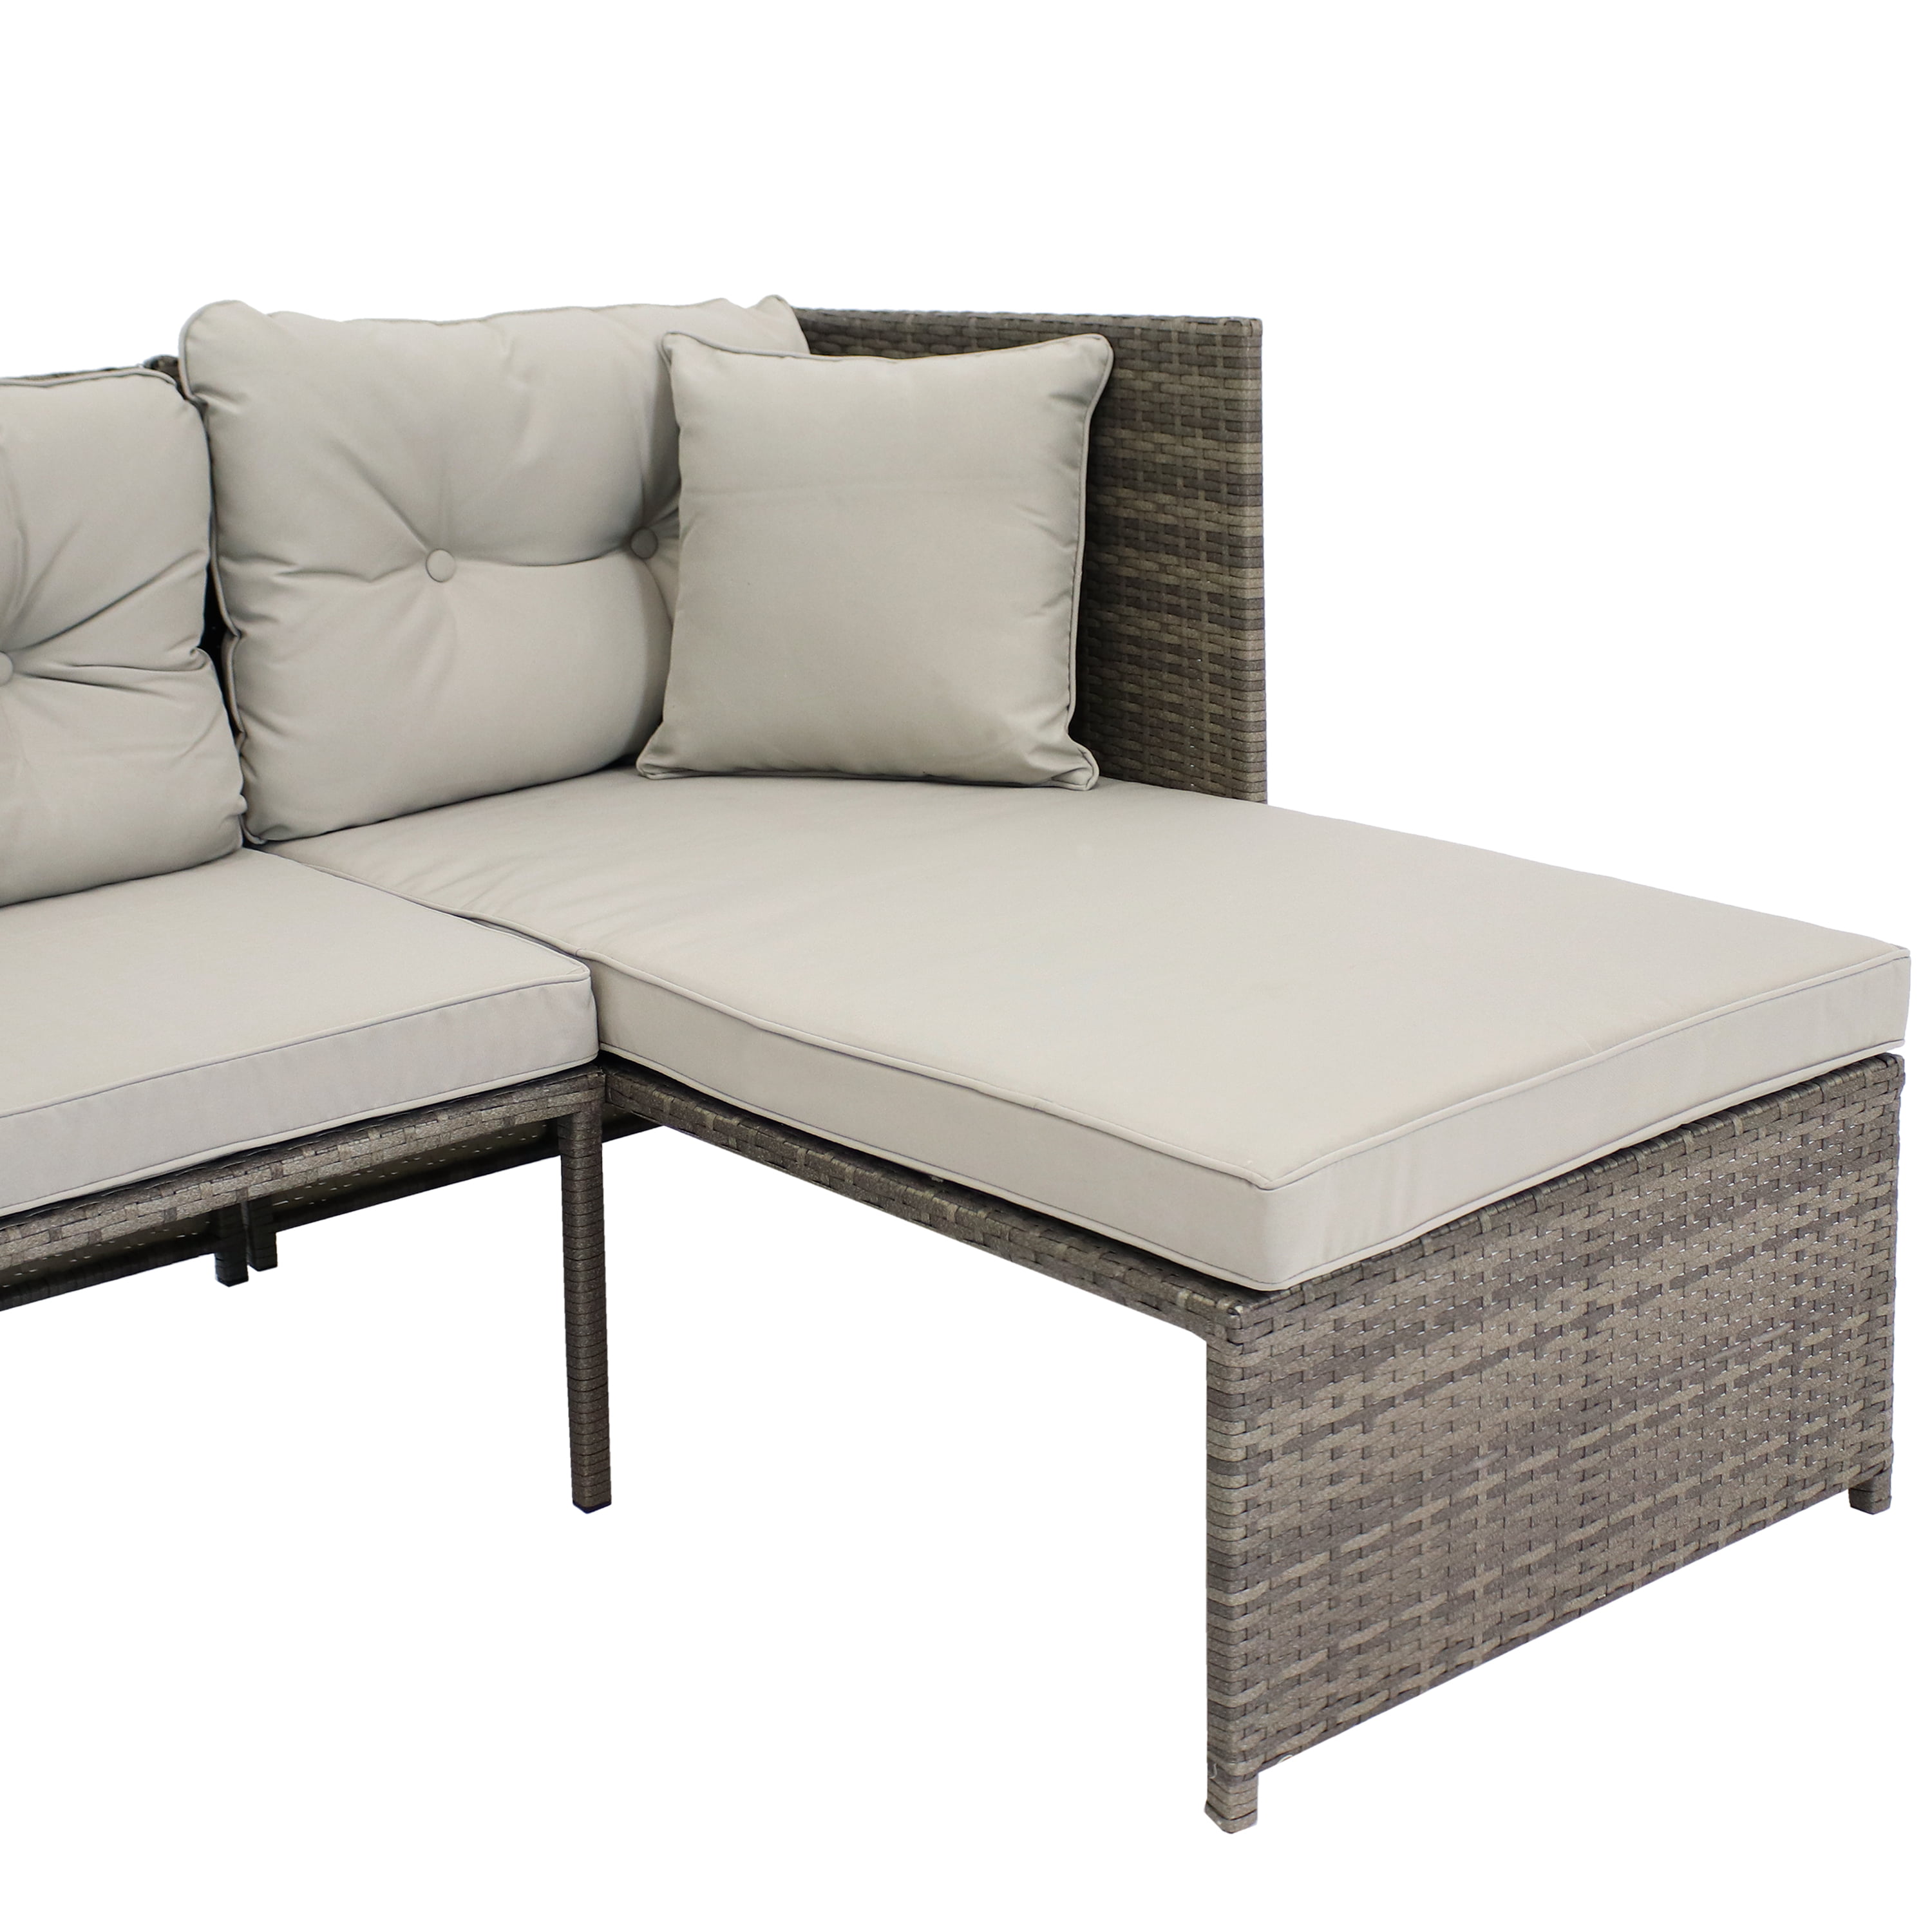 Sunnydaze Longford Outdoor Patio Sectional Sofa Set with Cushions - Stone Gray - image 5 of 12